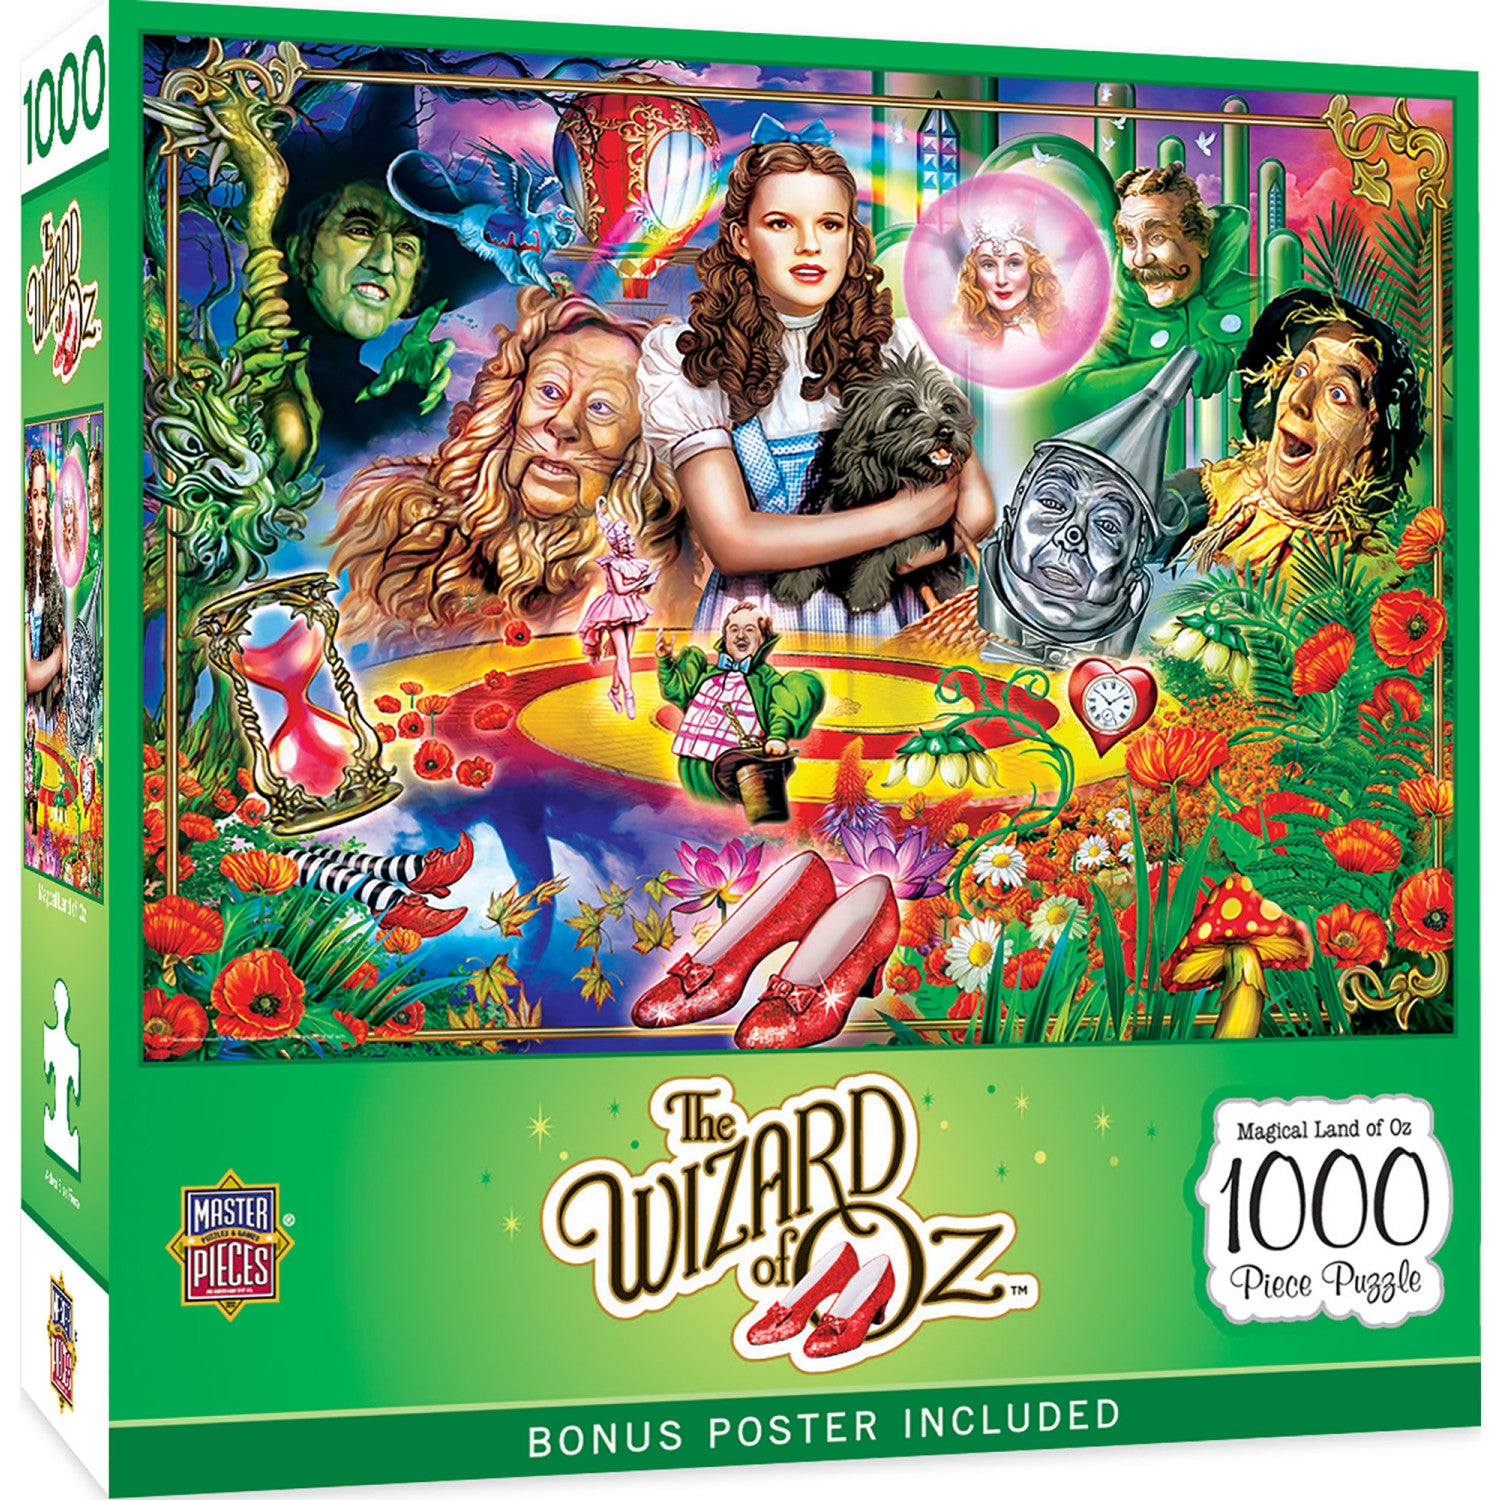 The Wizard of Oz - Magical Land of Oz 1000 Piece Jigsaw Puzzle